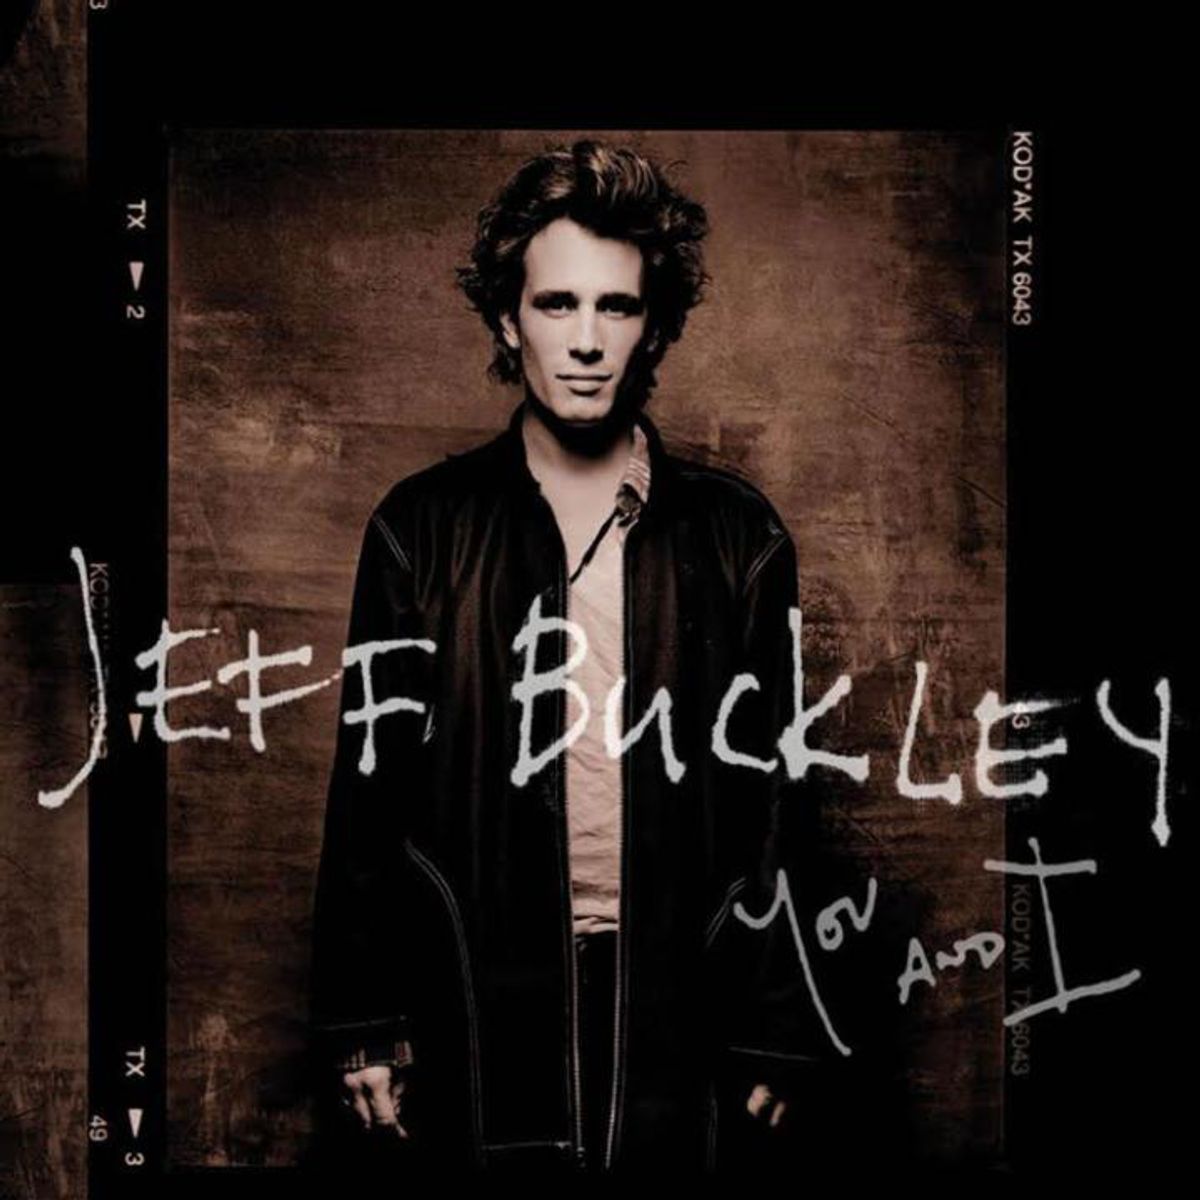 Jeff Buckley - 'You And I'